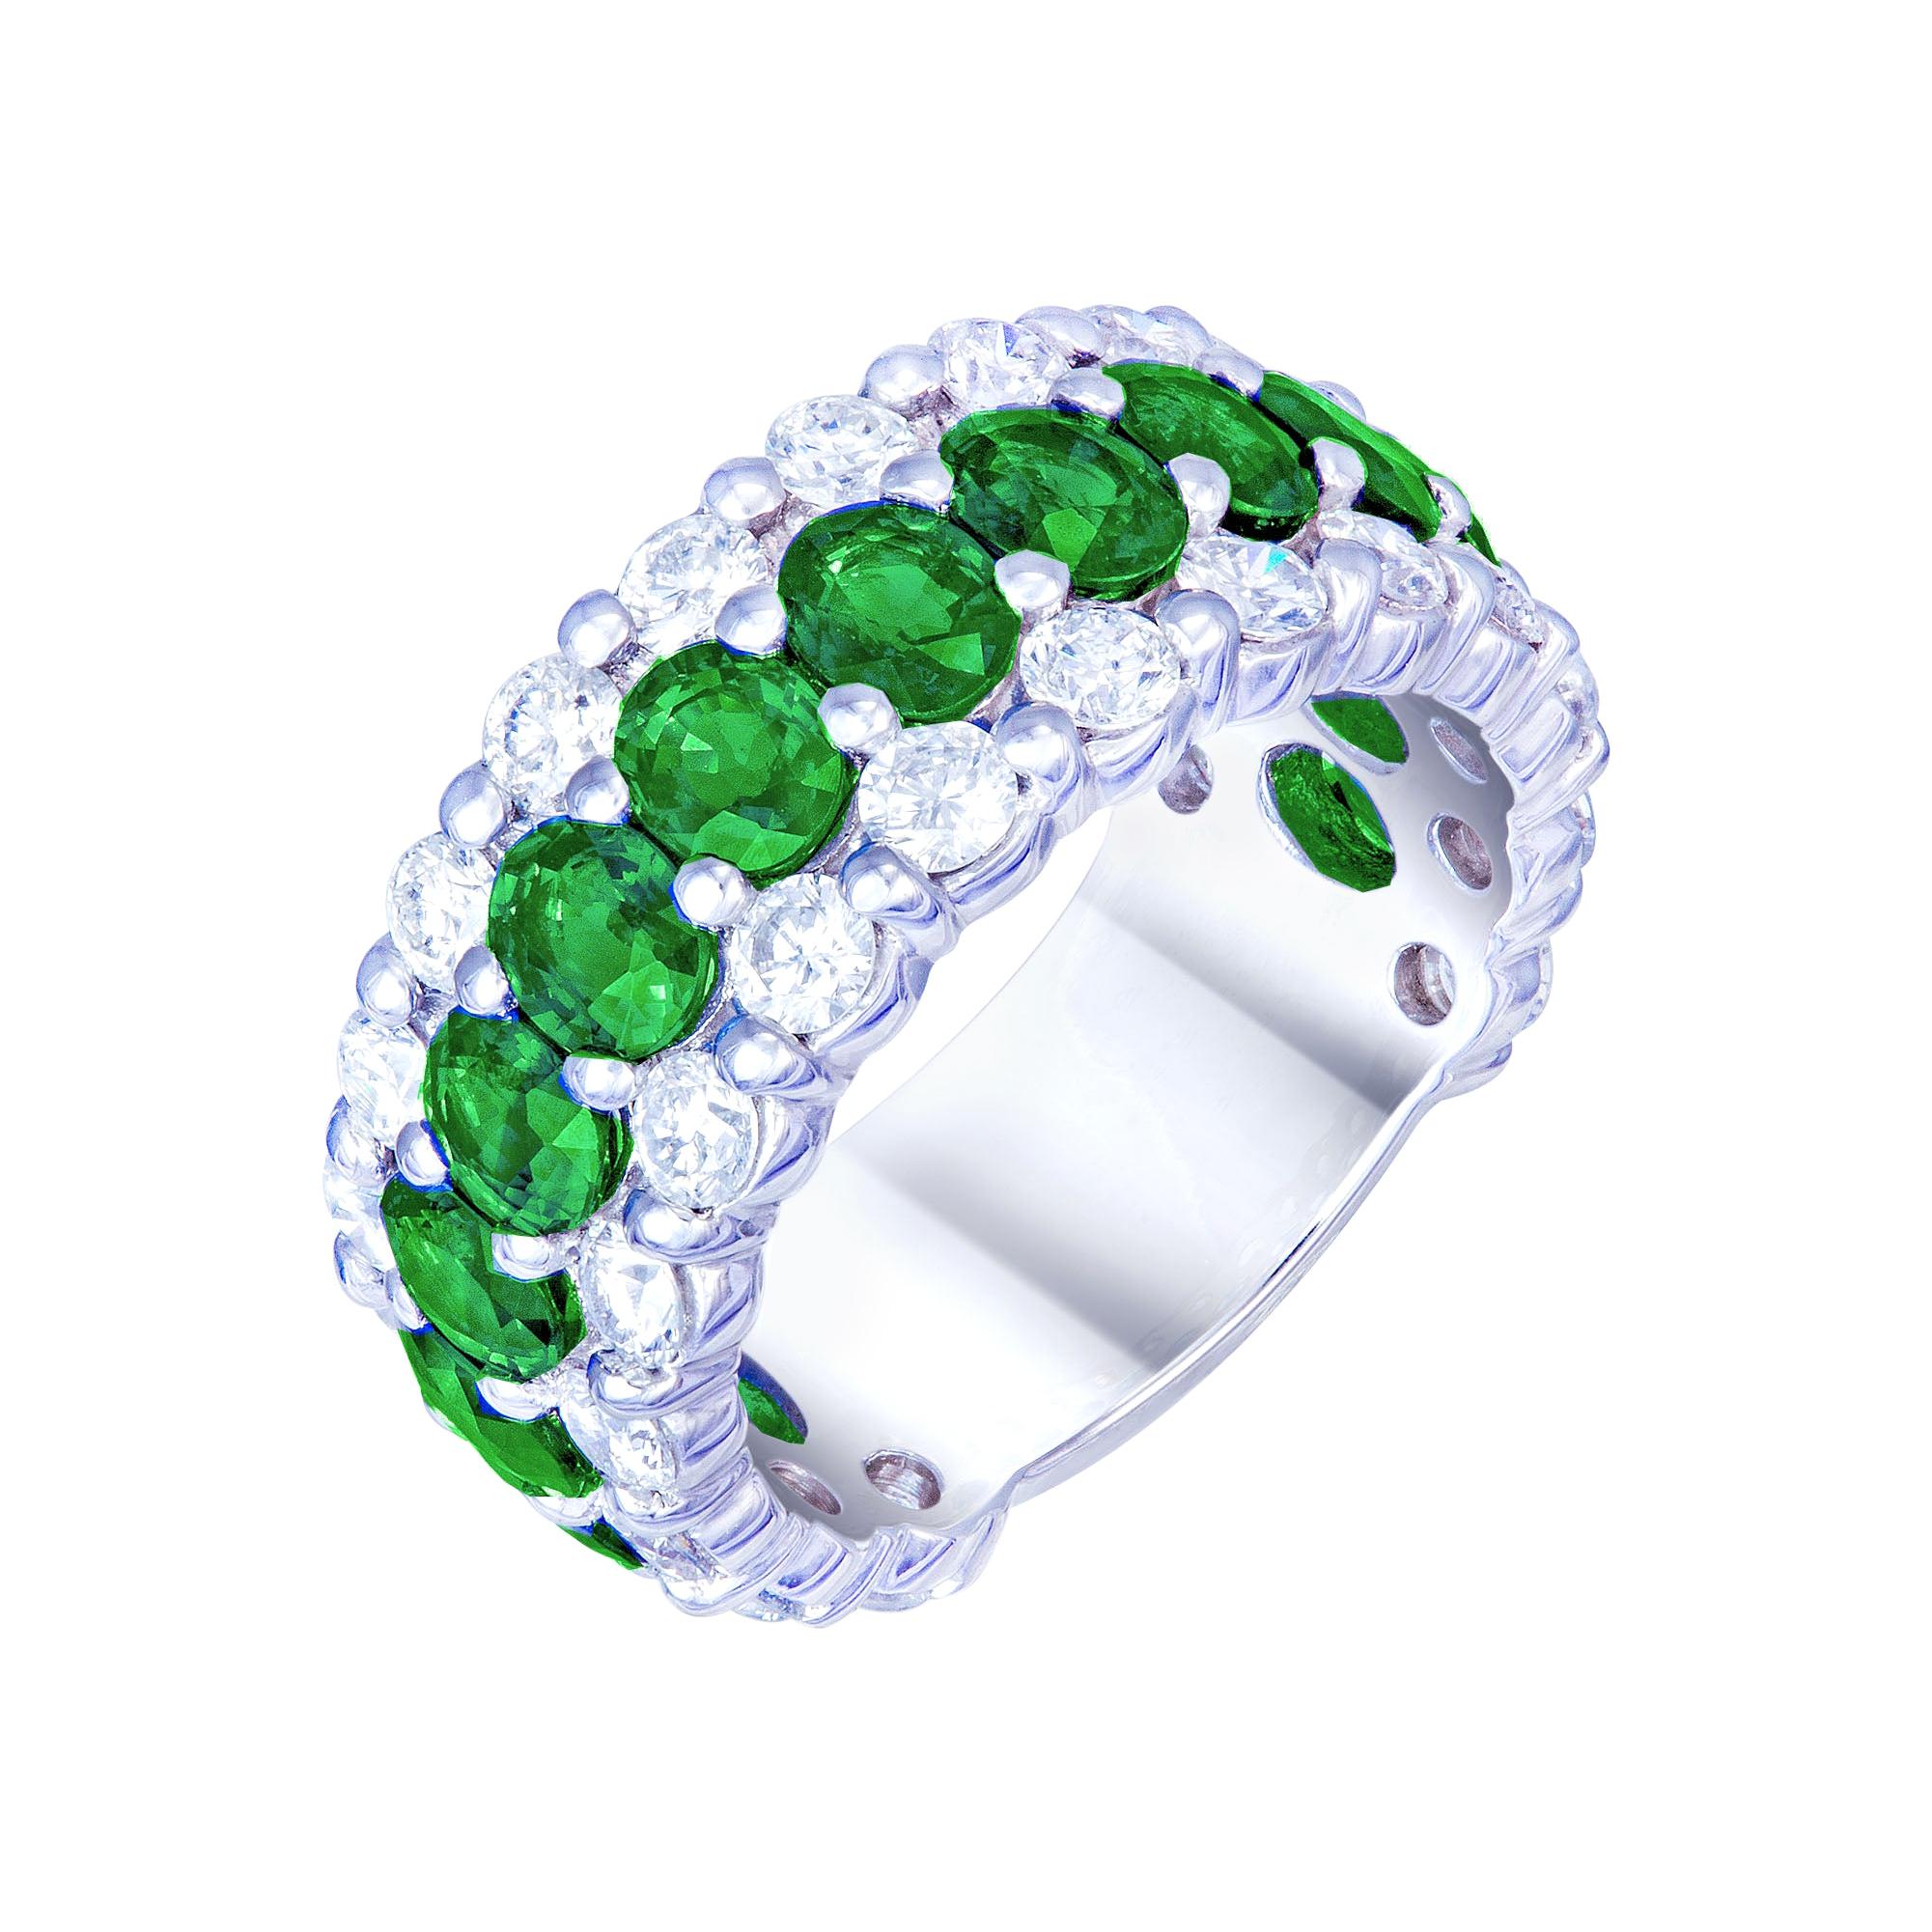 The Classic Green Emerald White Diamond White Gold Band Ring for Her 18k